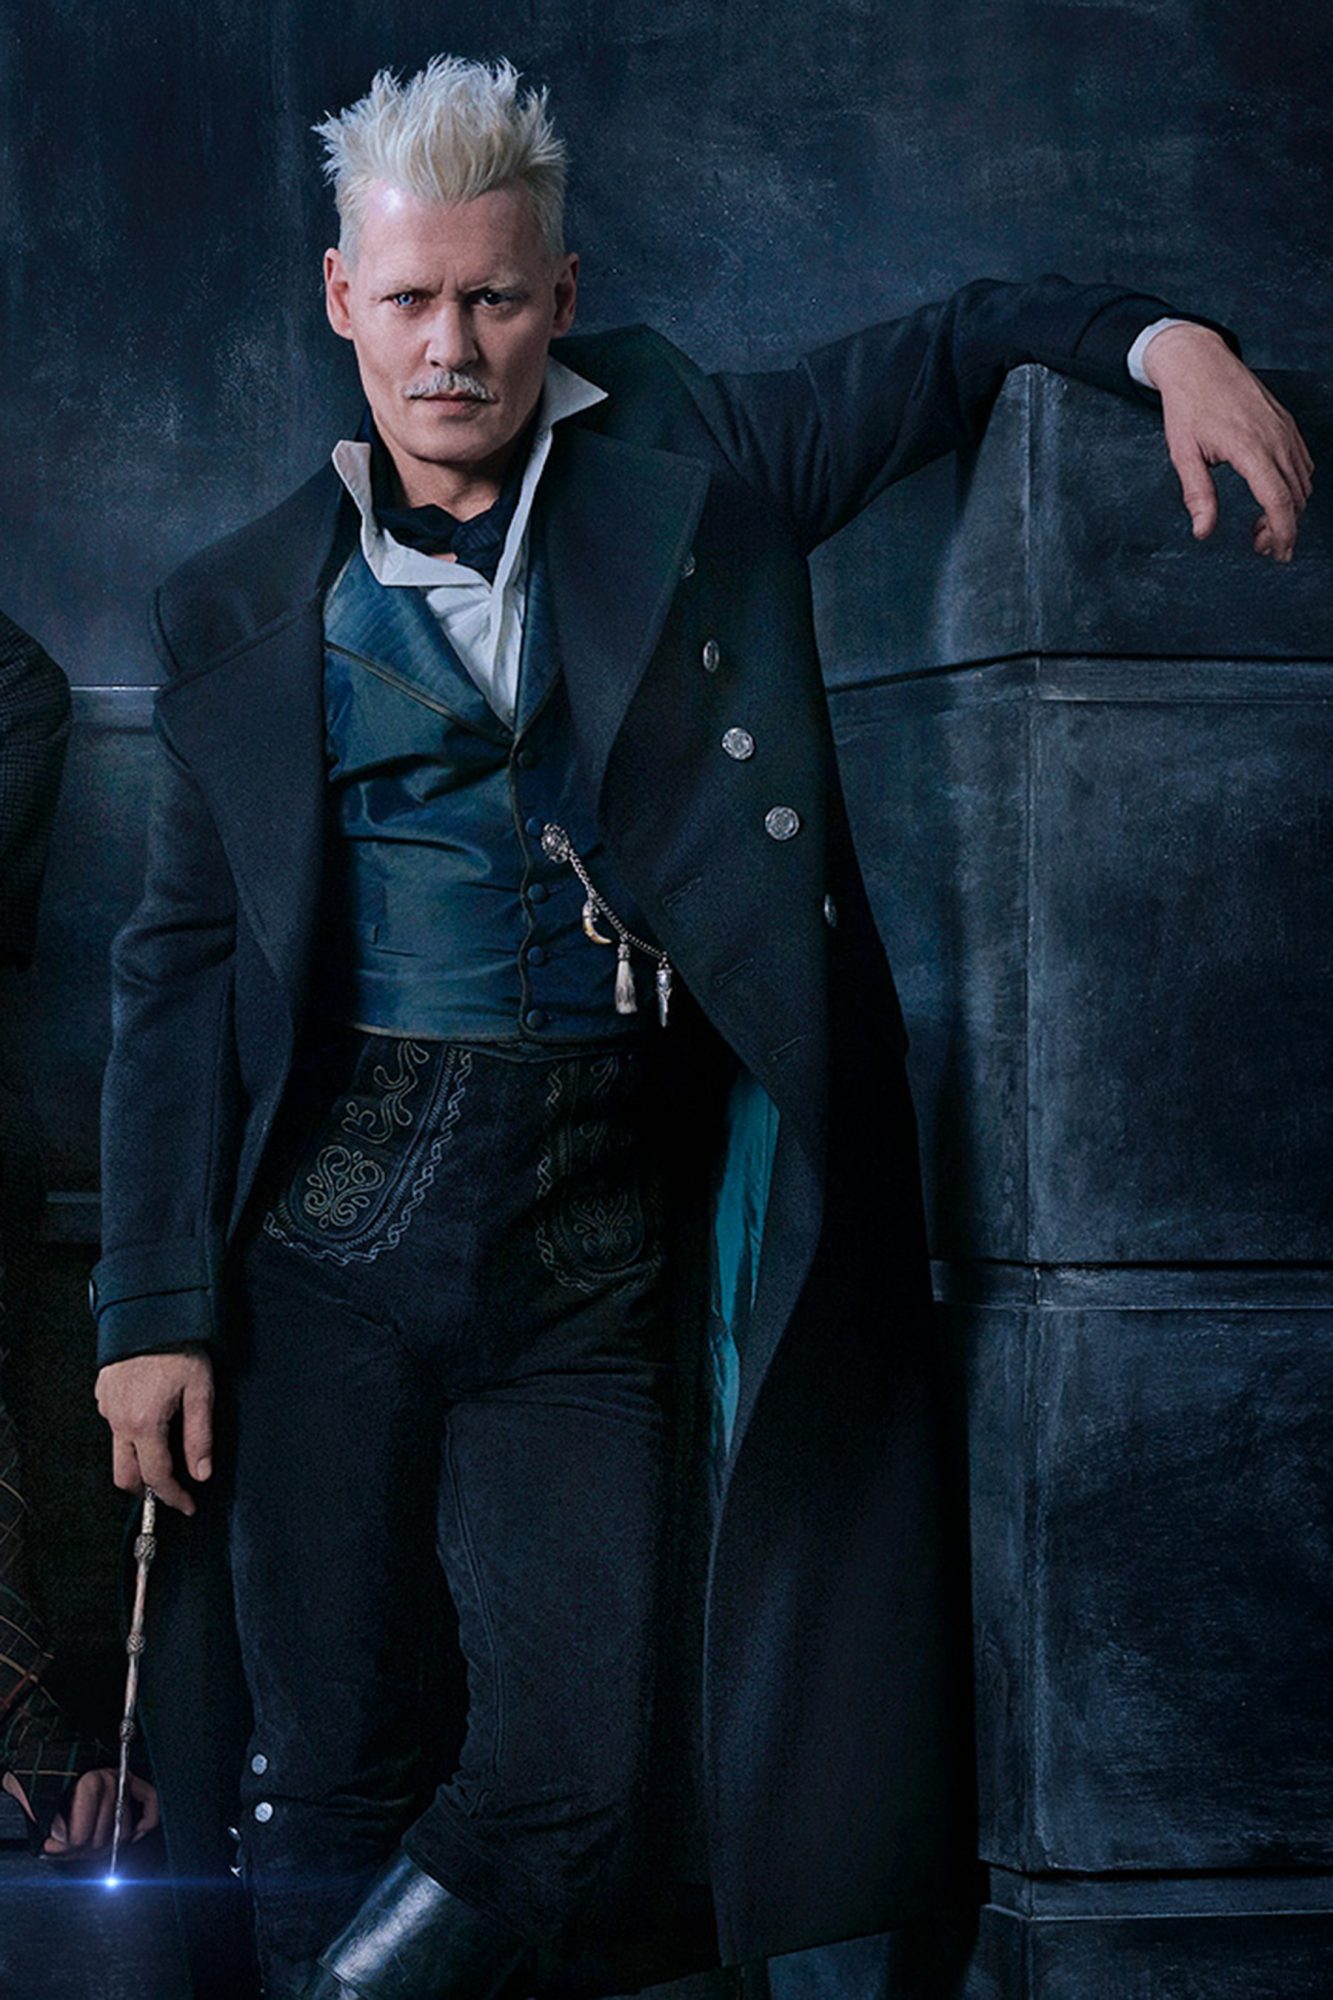 Johnny Depp to earn $10 million for a scene from Warner Bros